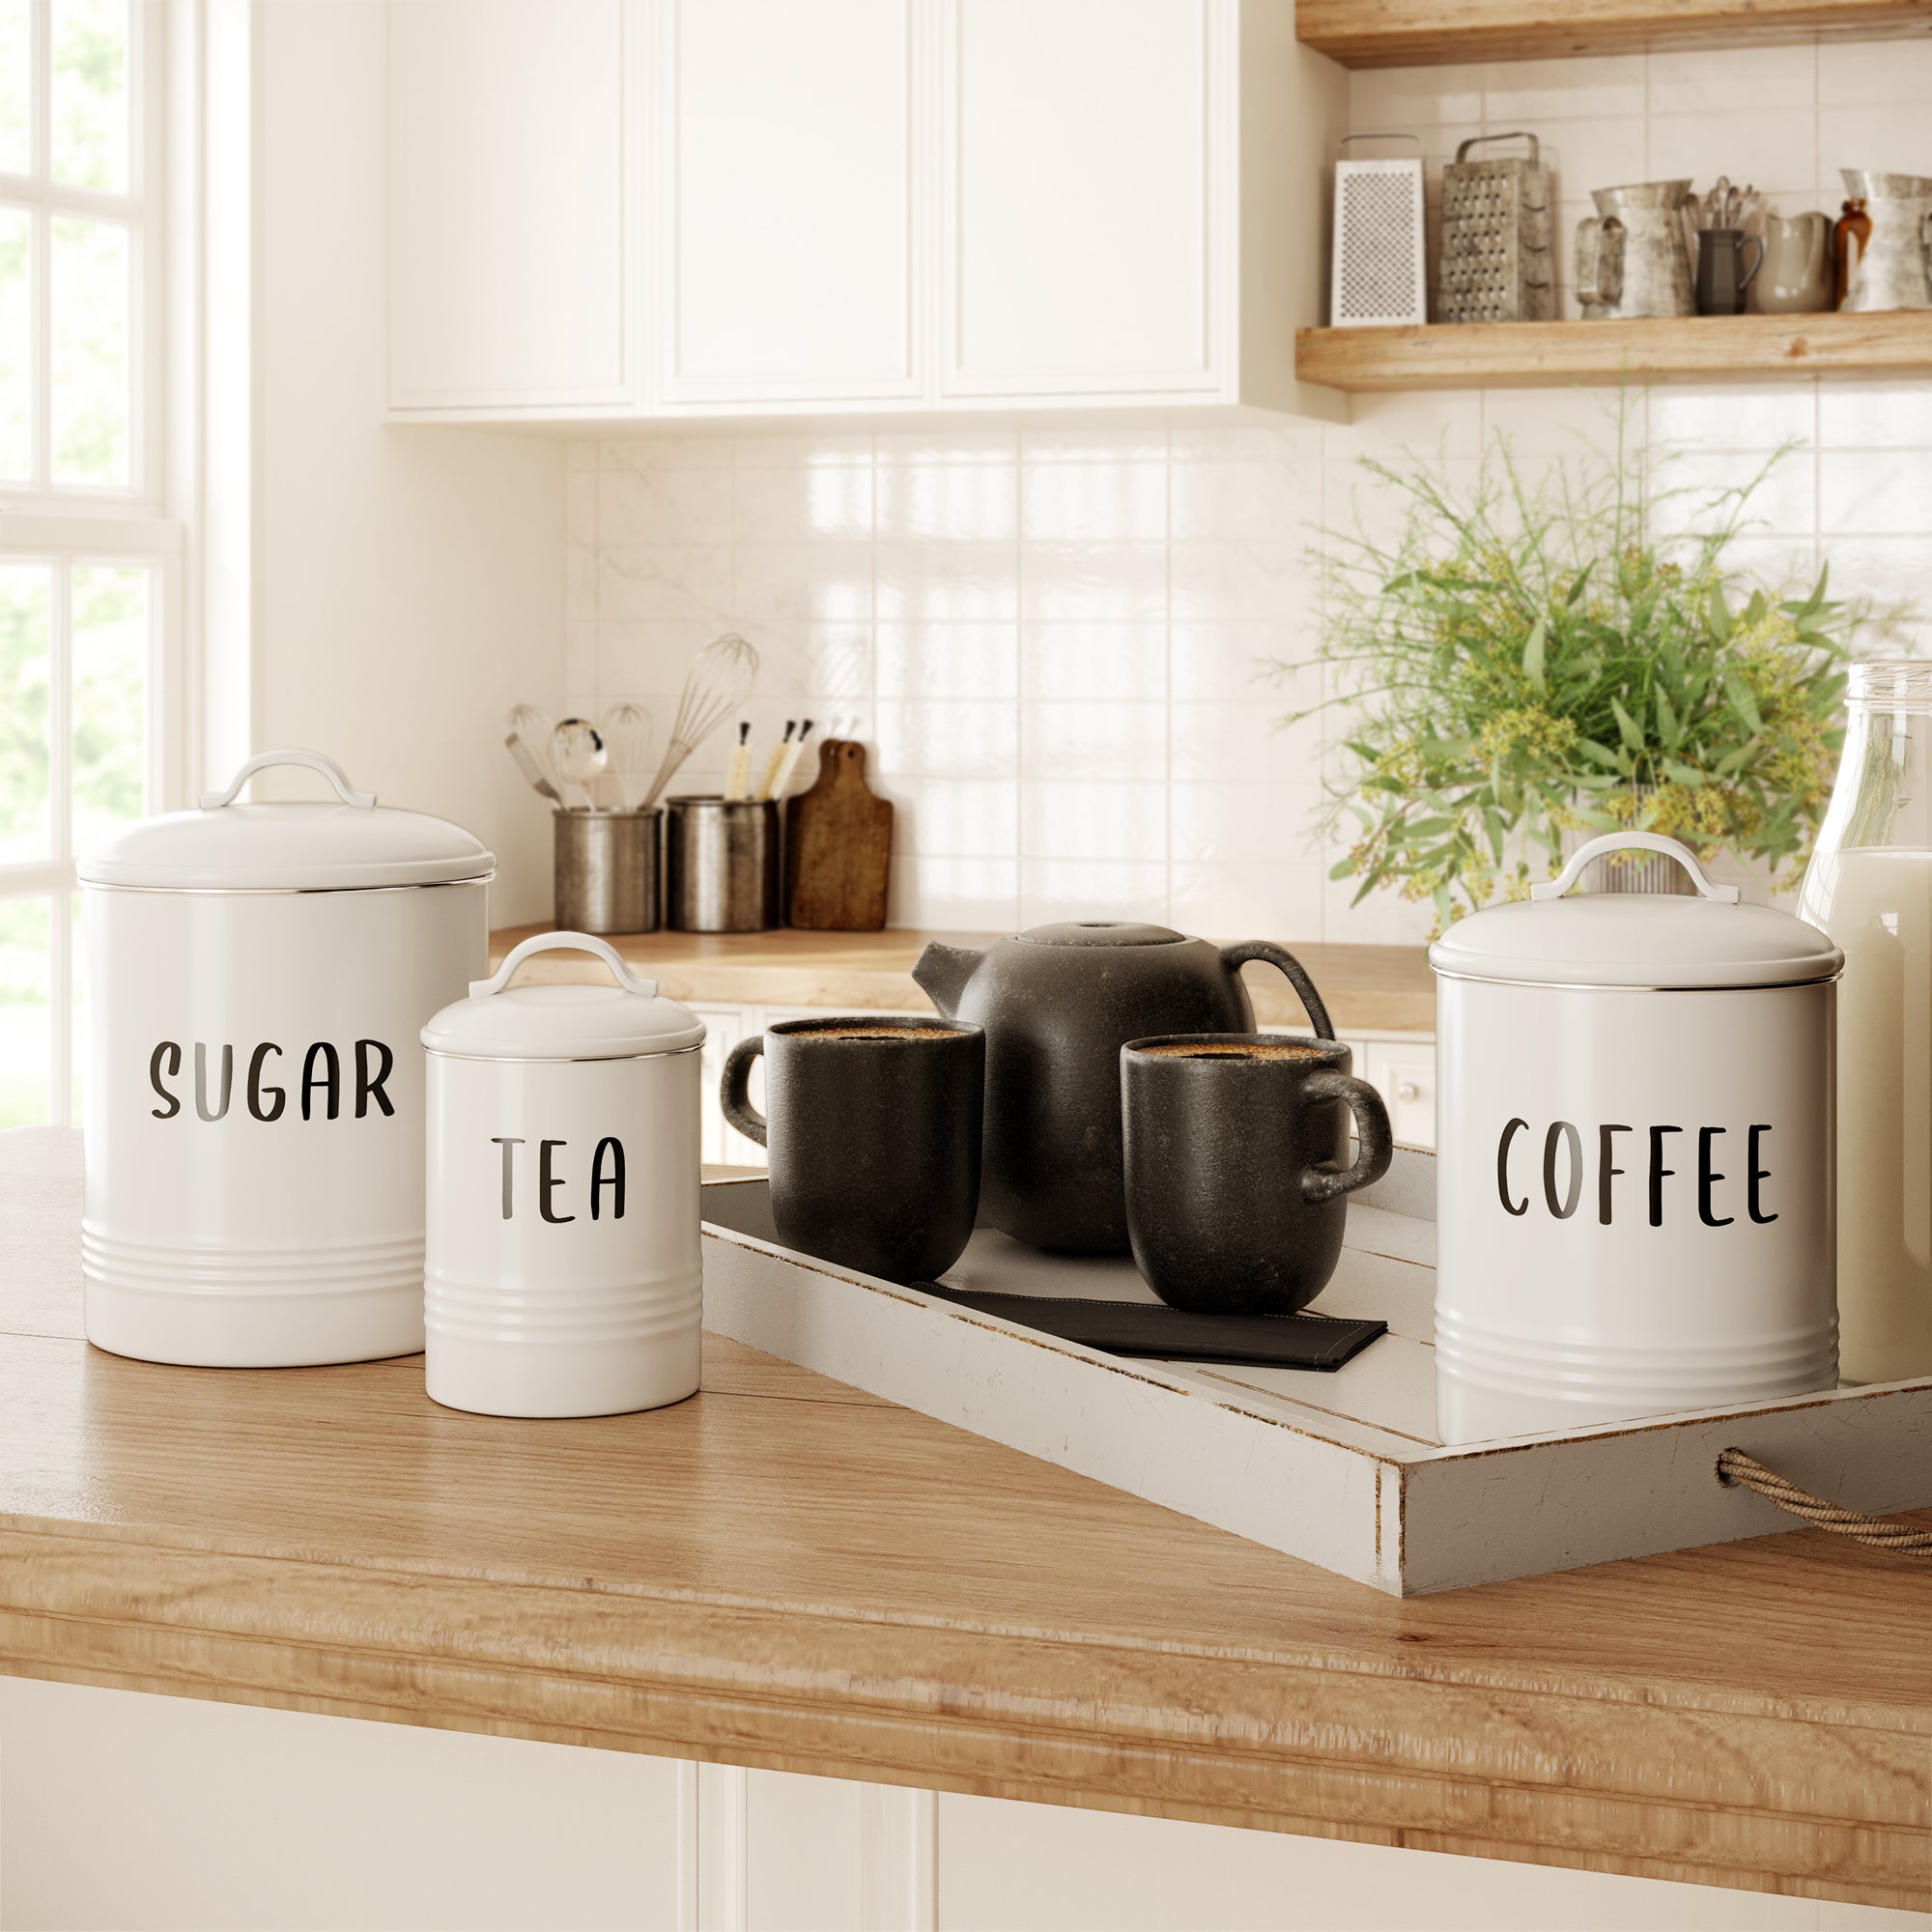 Barnyard Designs Black Canister Sets for Kitchen Counter, Vintage Kitchen  Canisters, Country Rustic Farmhouse Decor for the Kitchen, Coffee Tea Sugar